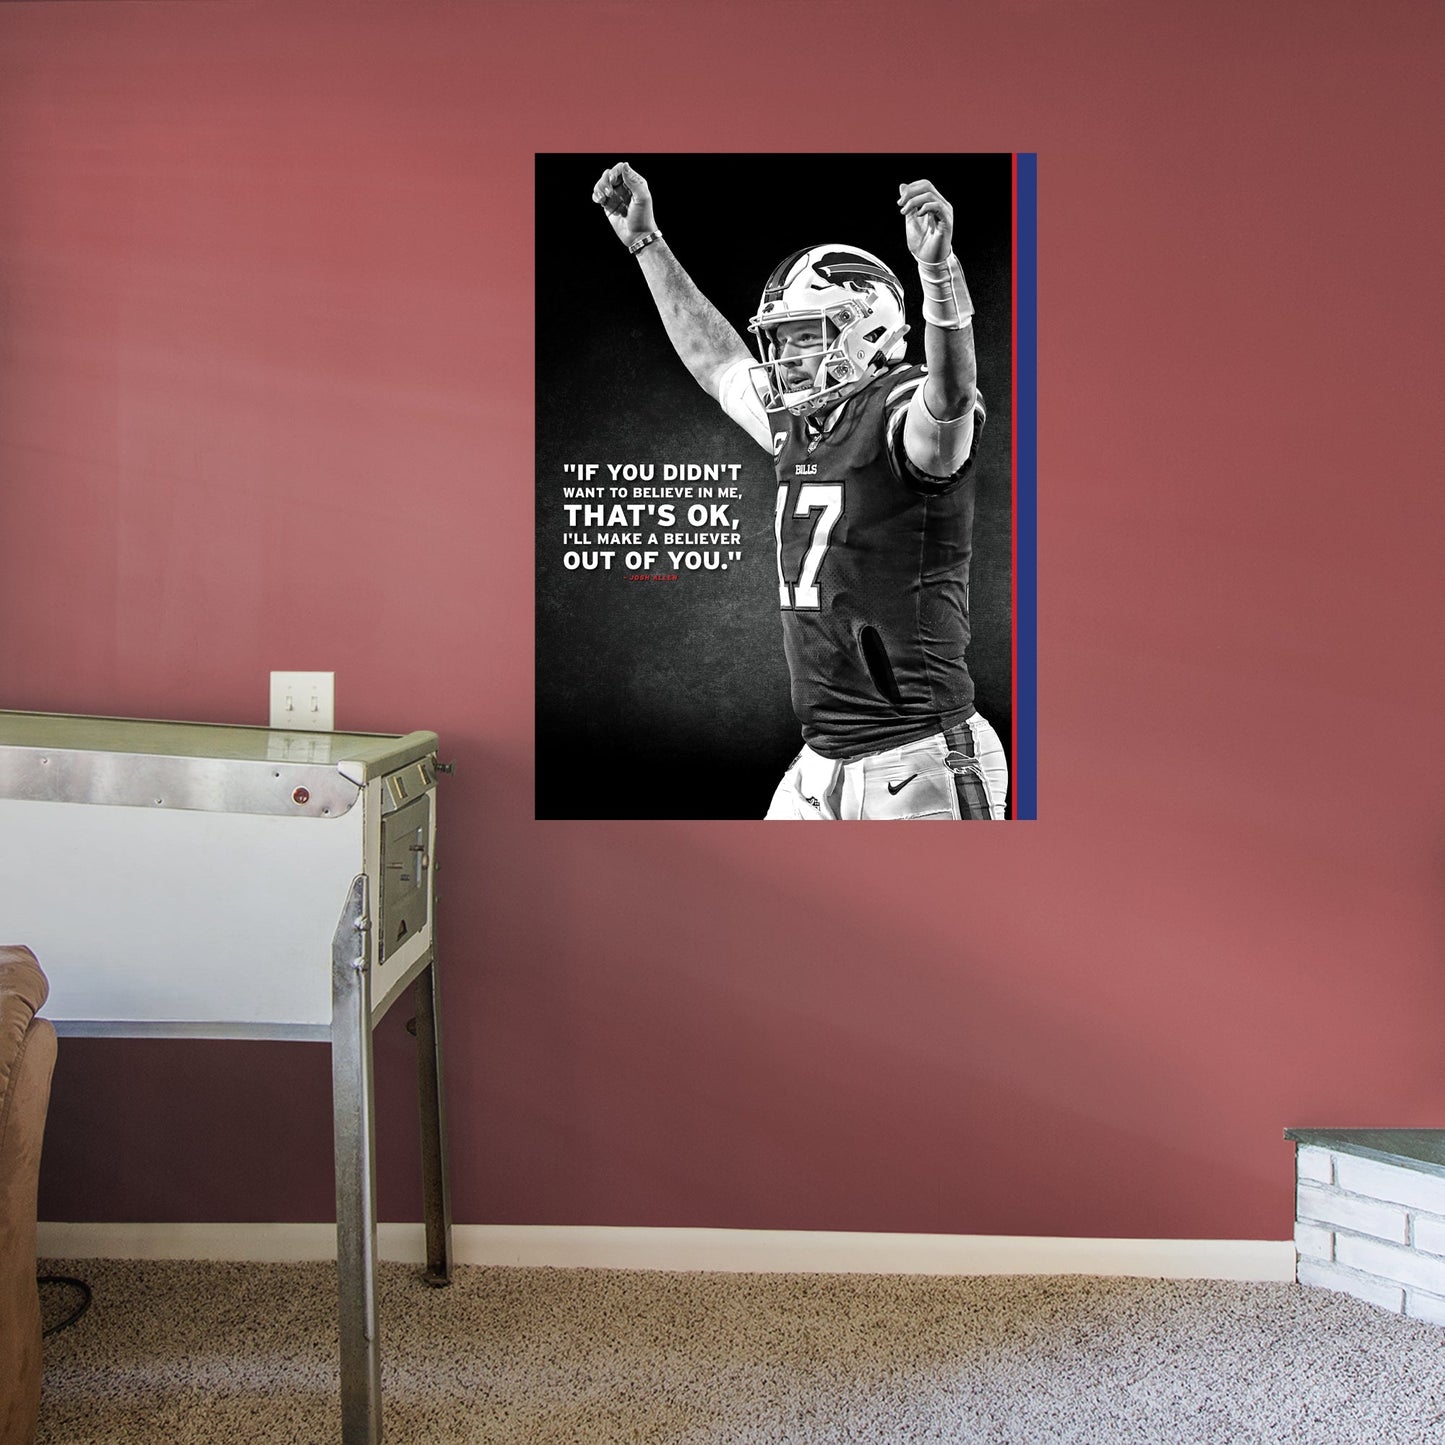 Buffalo Bills: Josh Allen Inspirational Poster - Officially Licensed NFL Removable Adhesive Decal